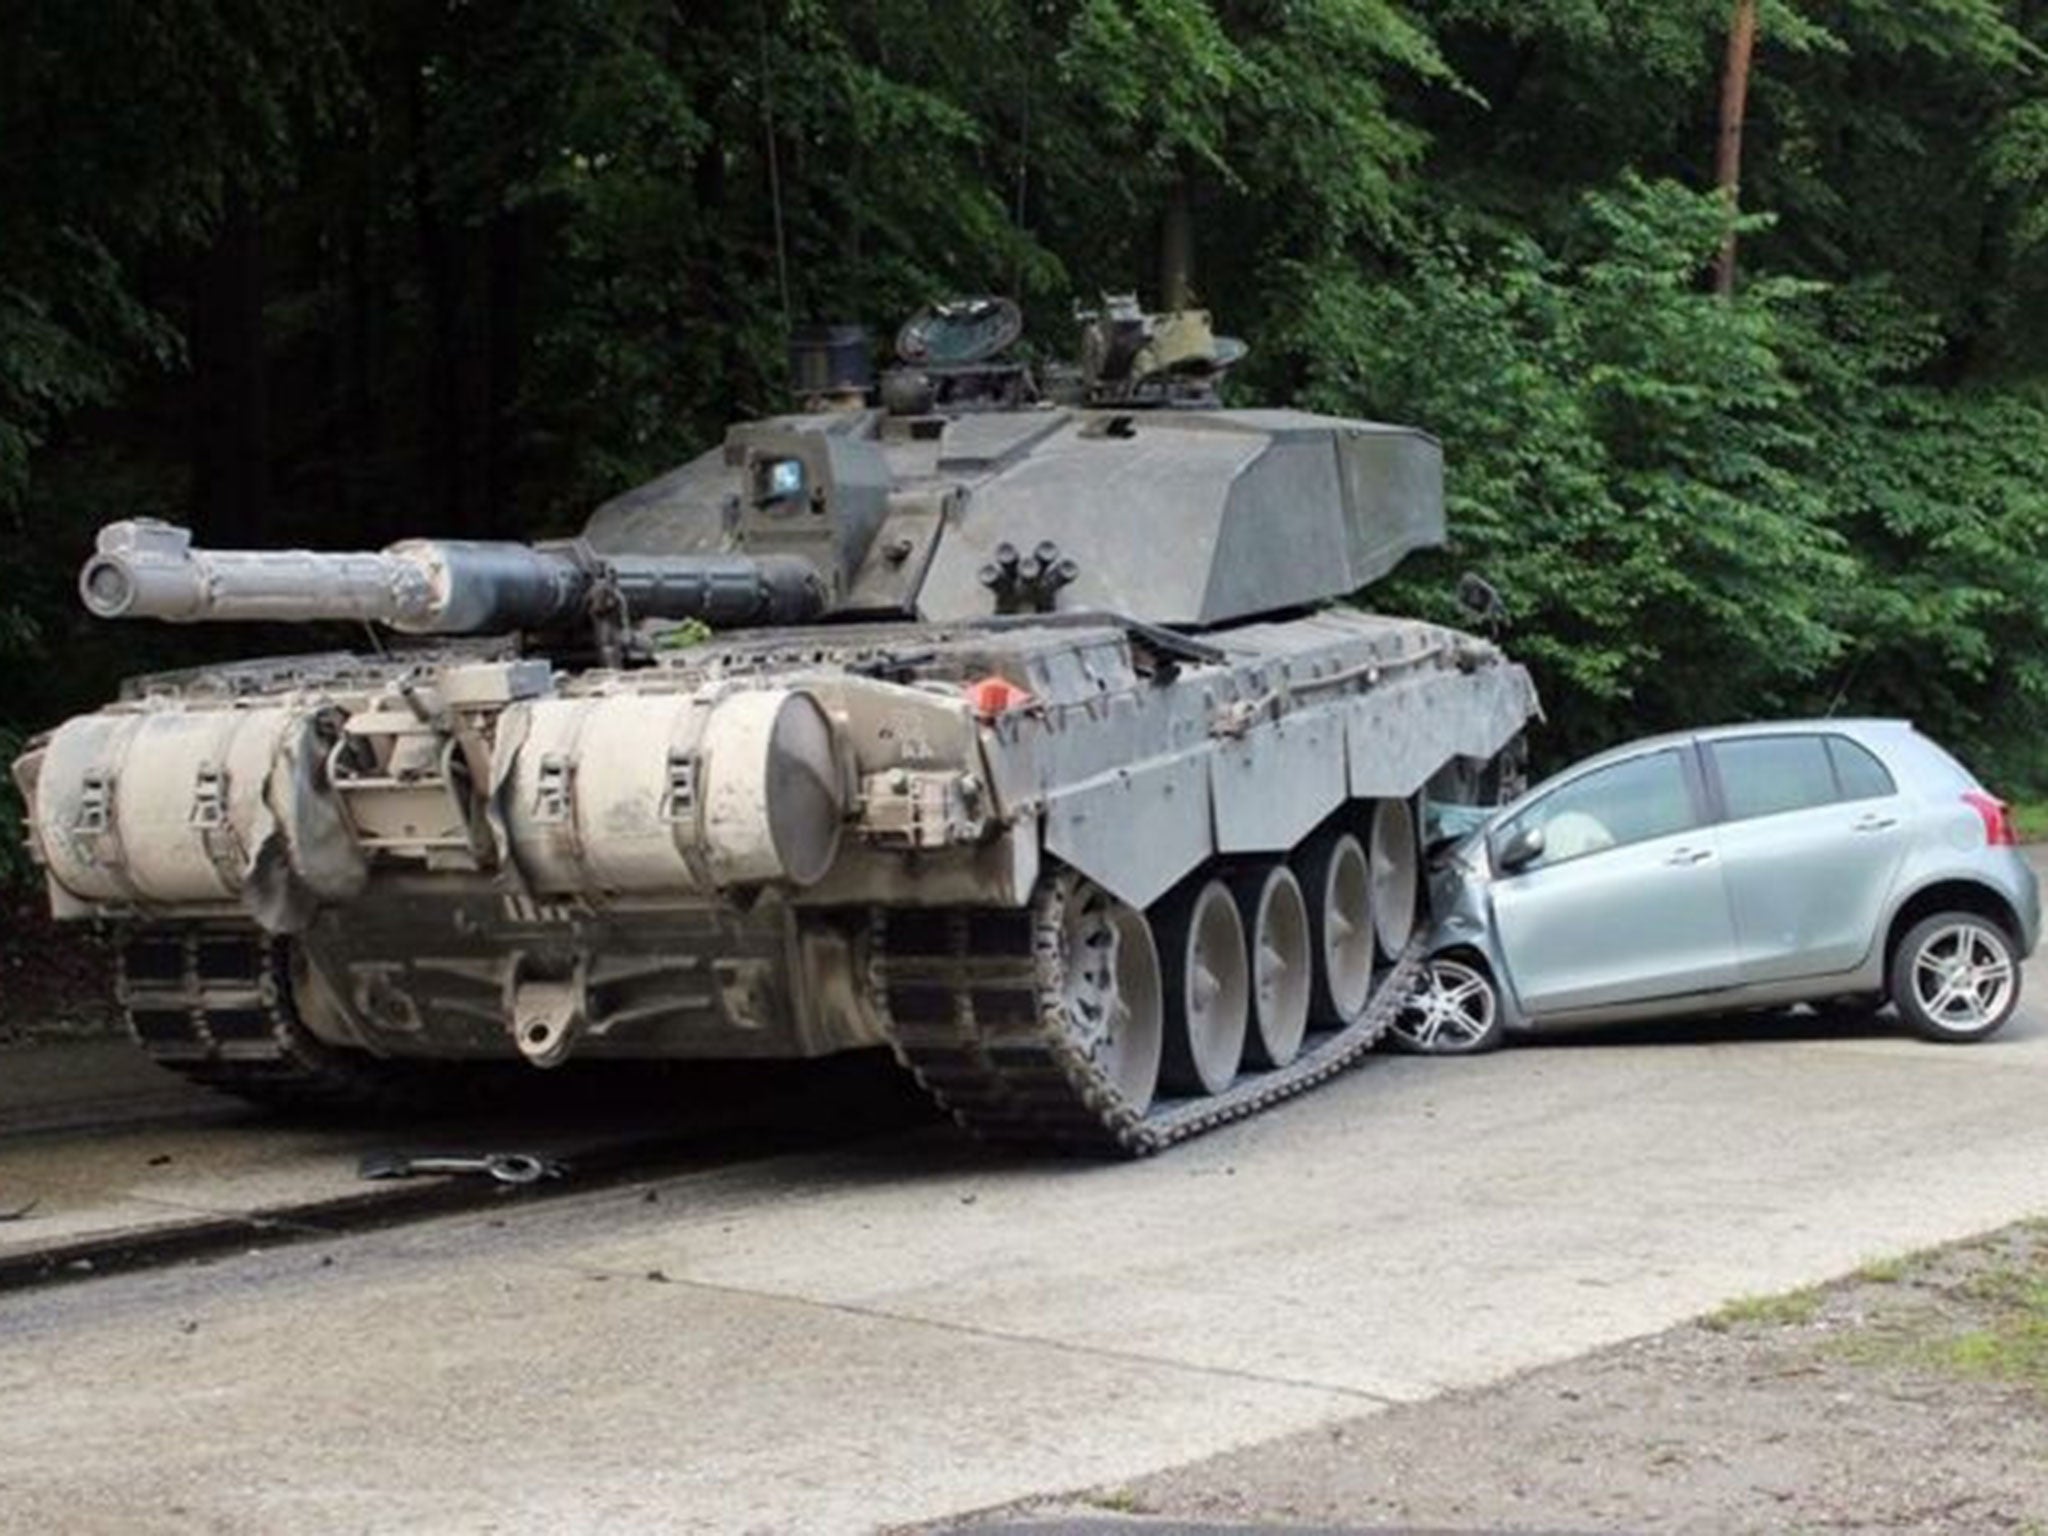 A British 'Challenger 2' tank after it rolled over a car's front in Lippe, Germany